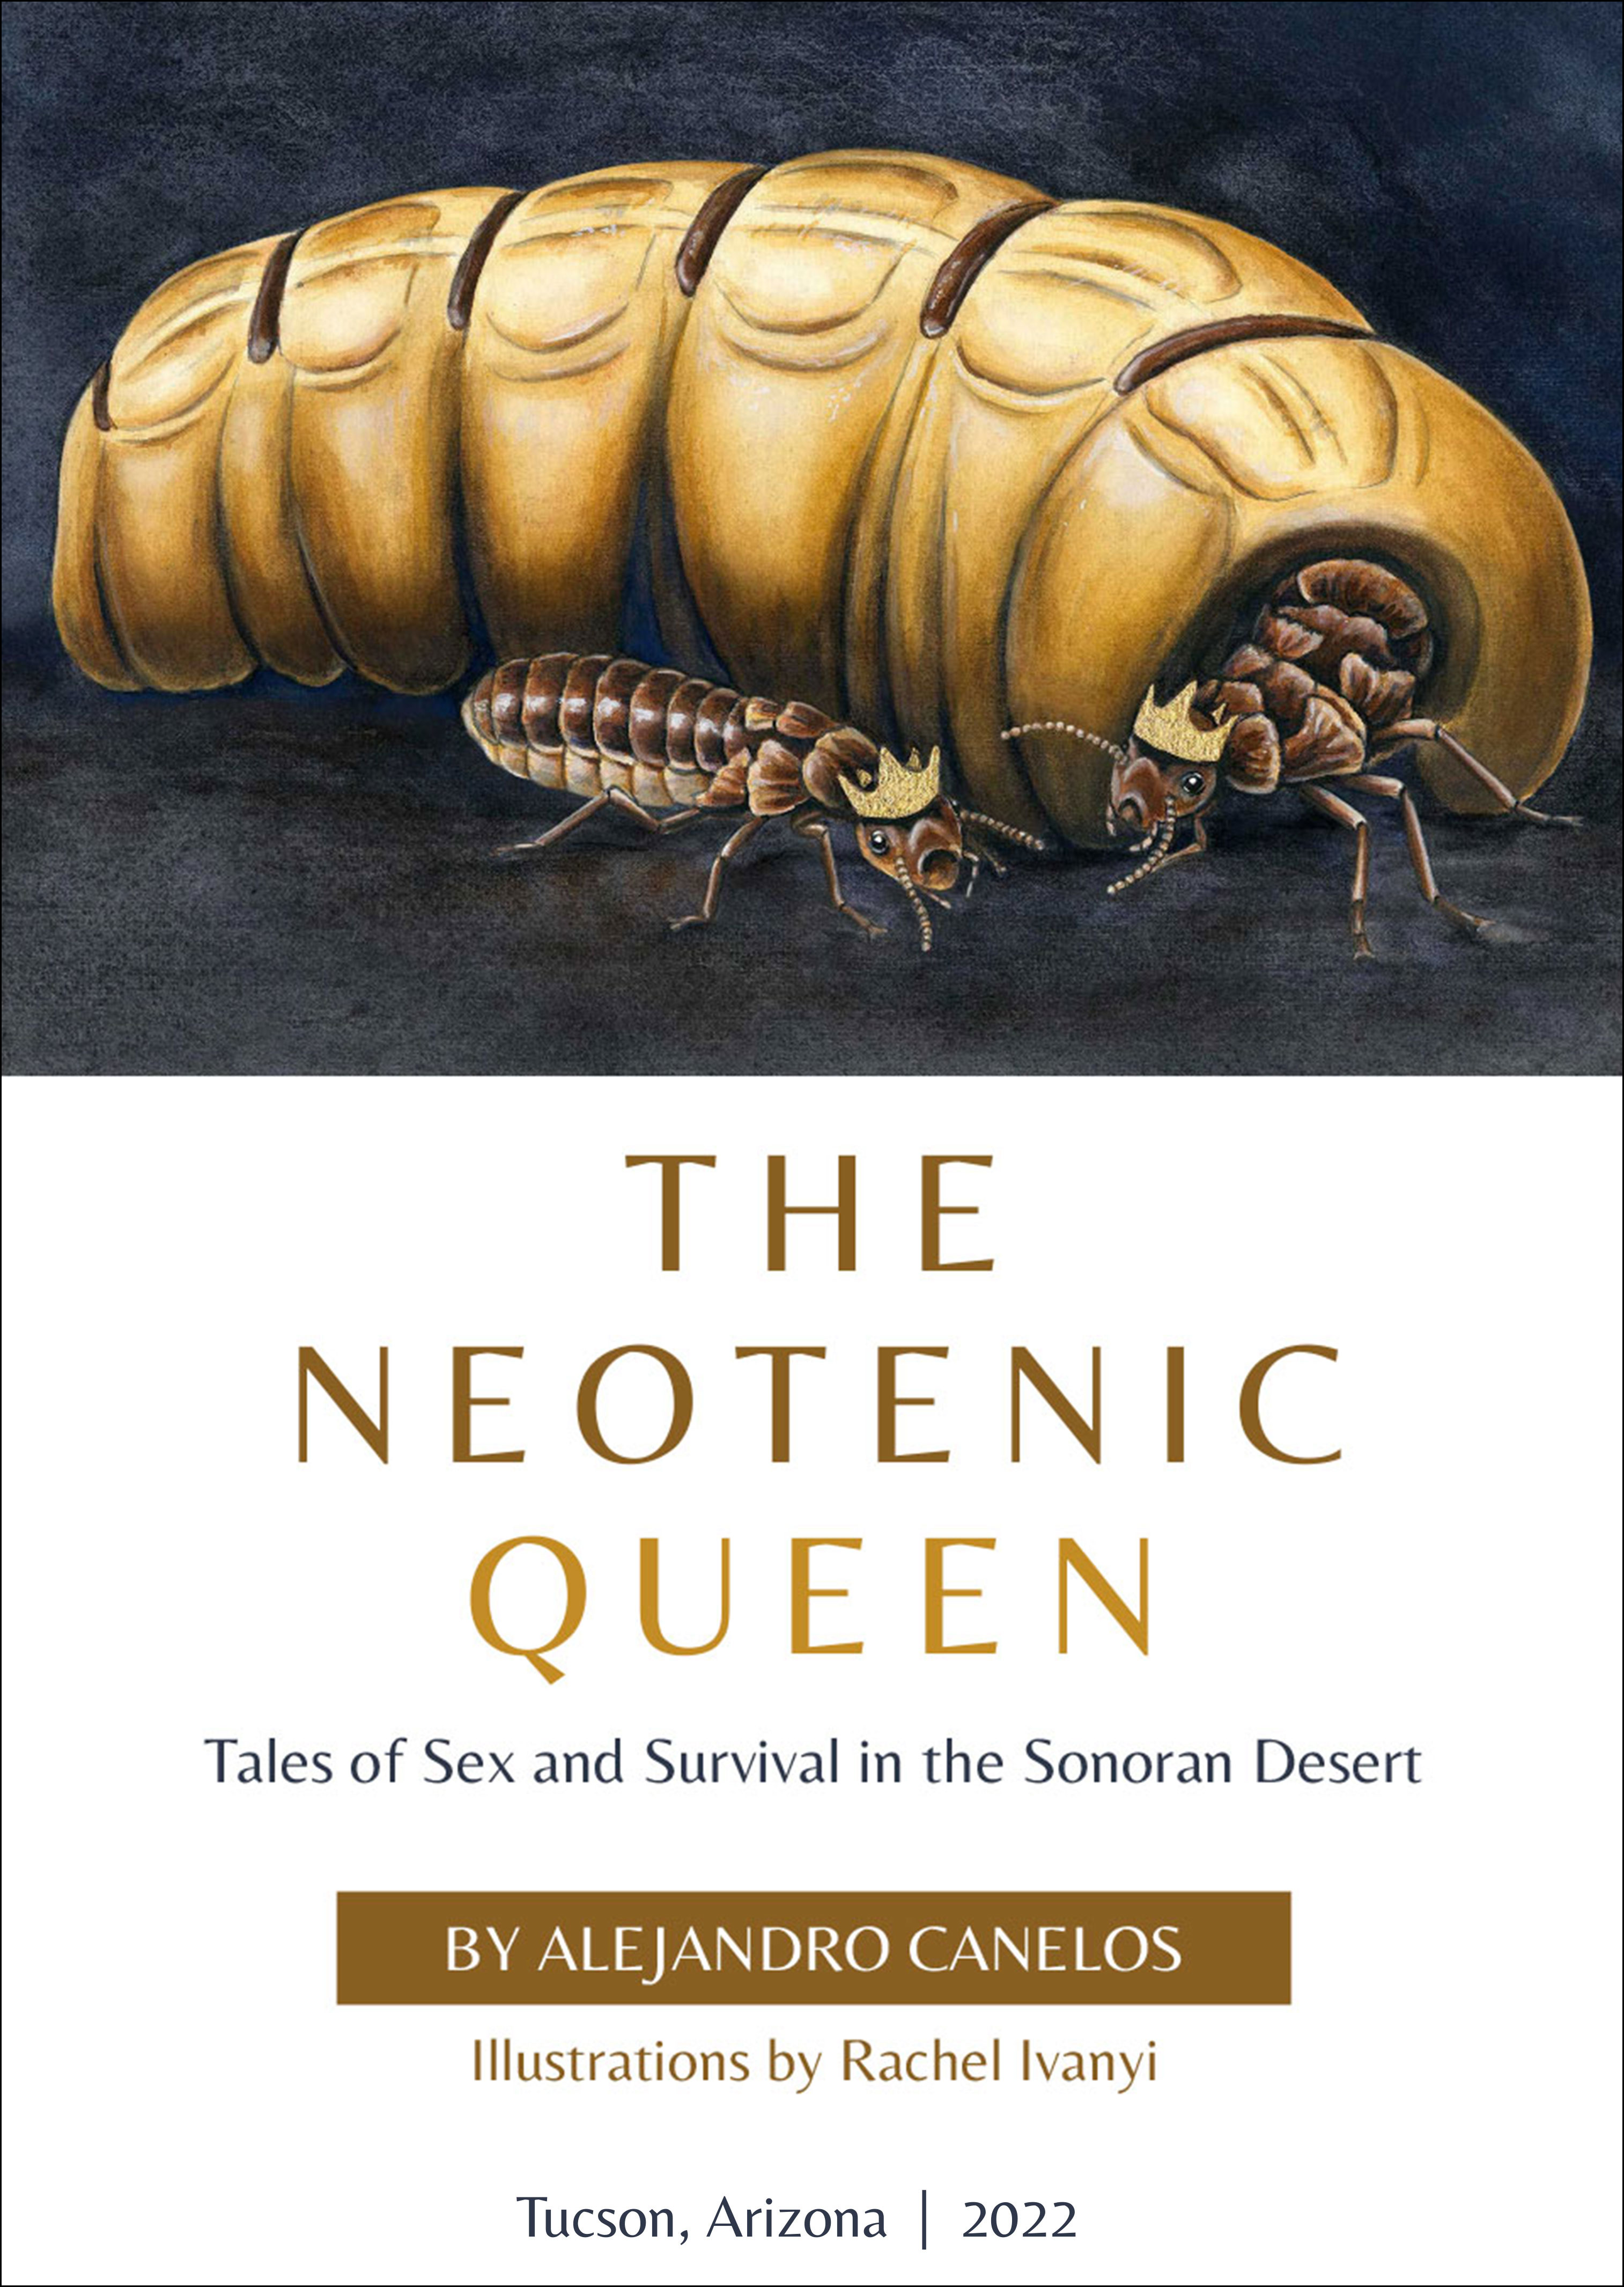 The Neotenic Queen - Book now Available